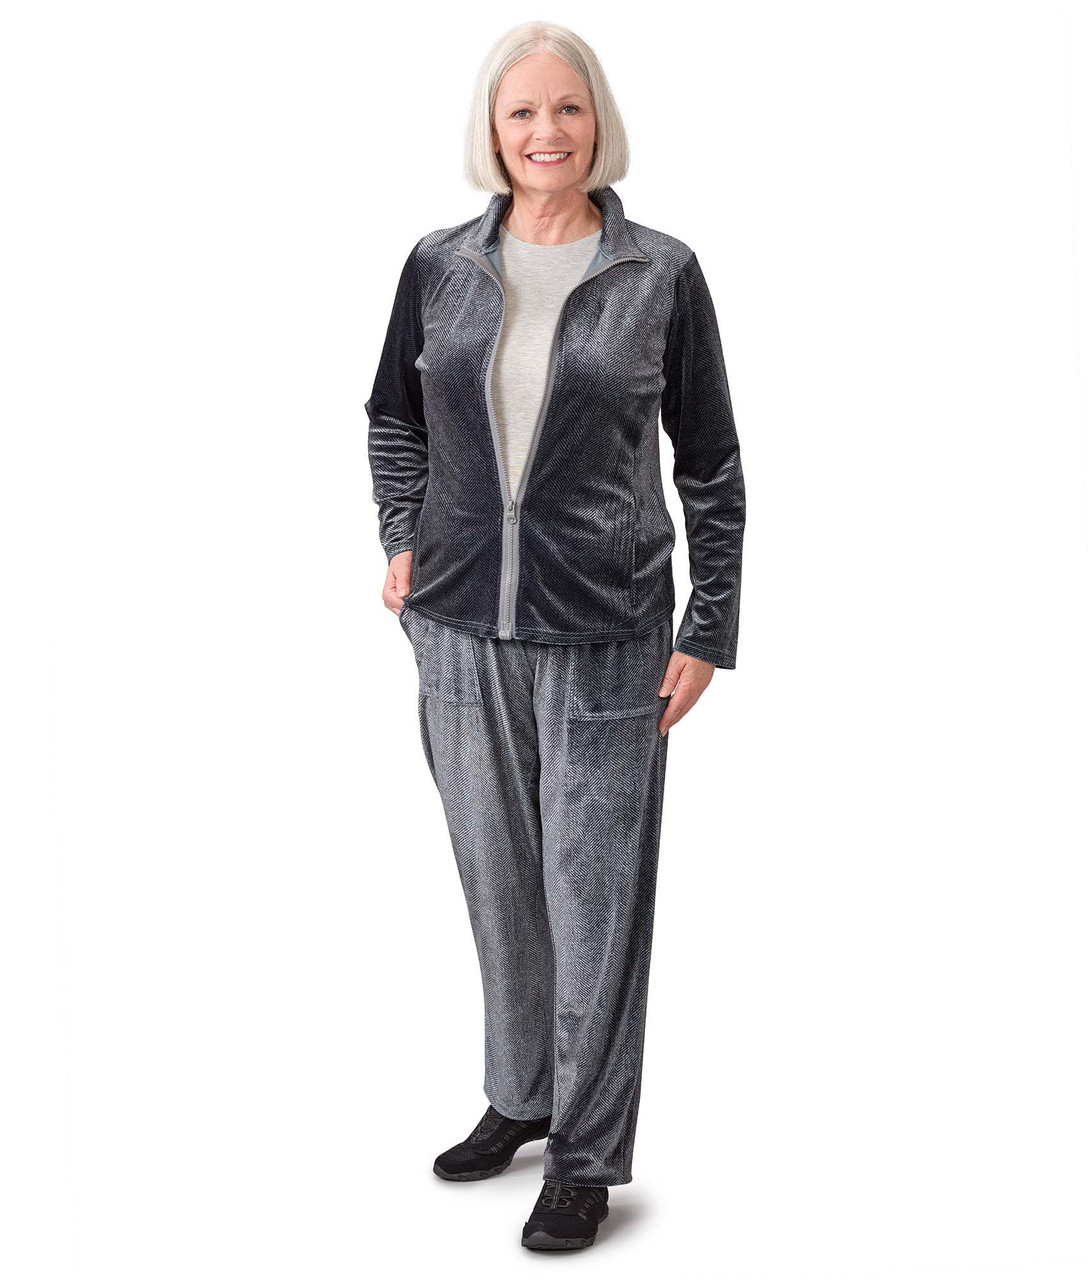 Silverts SV25500 Women's Tracksuit Magzip Top Pull-On Velour Set Gray Tan, Size=S, SV25500-SV1467-S